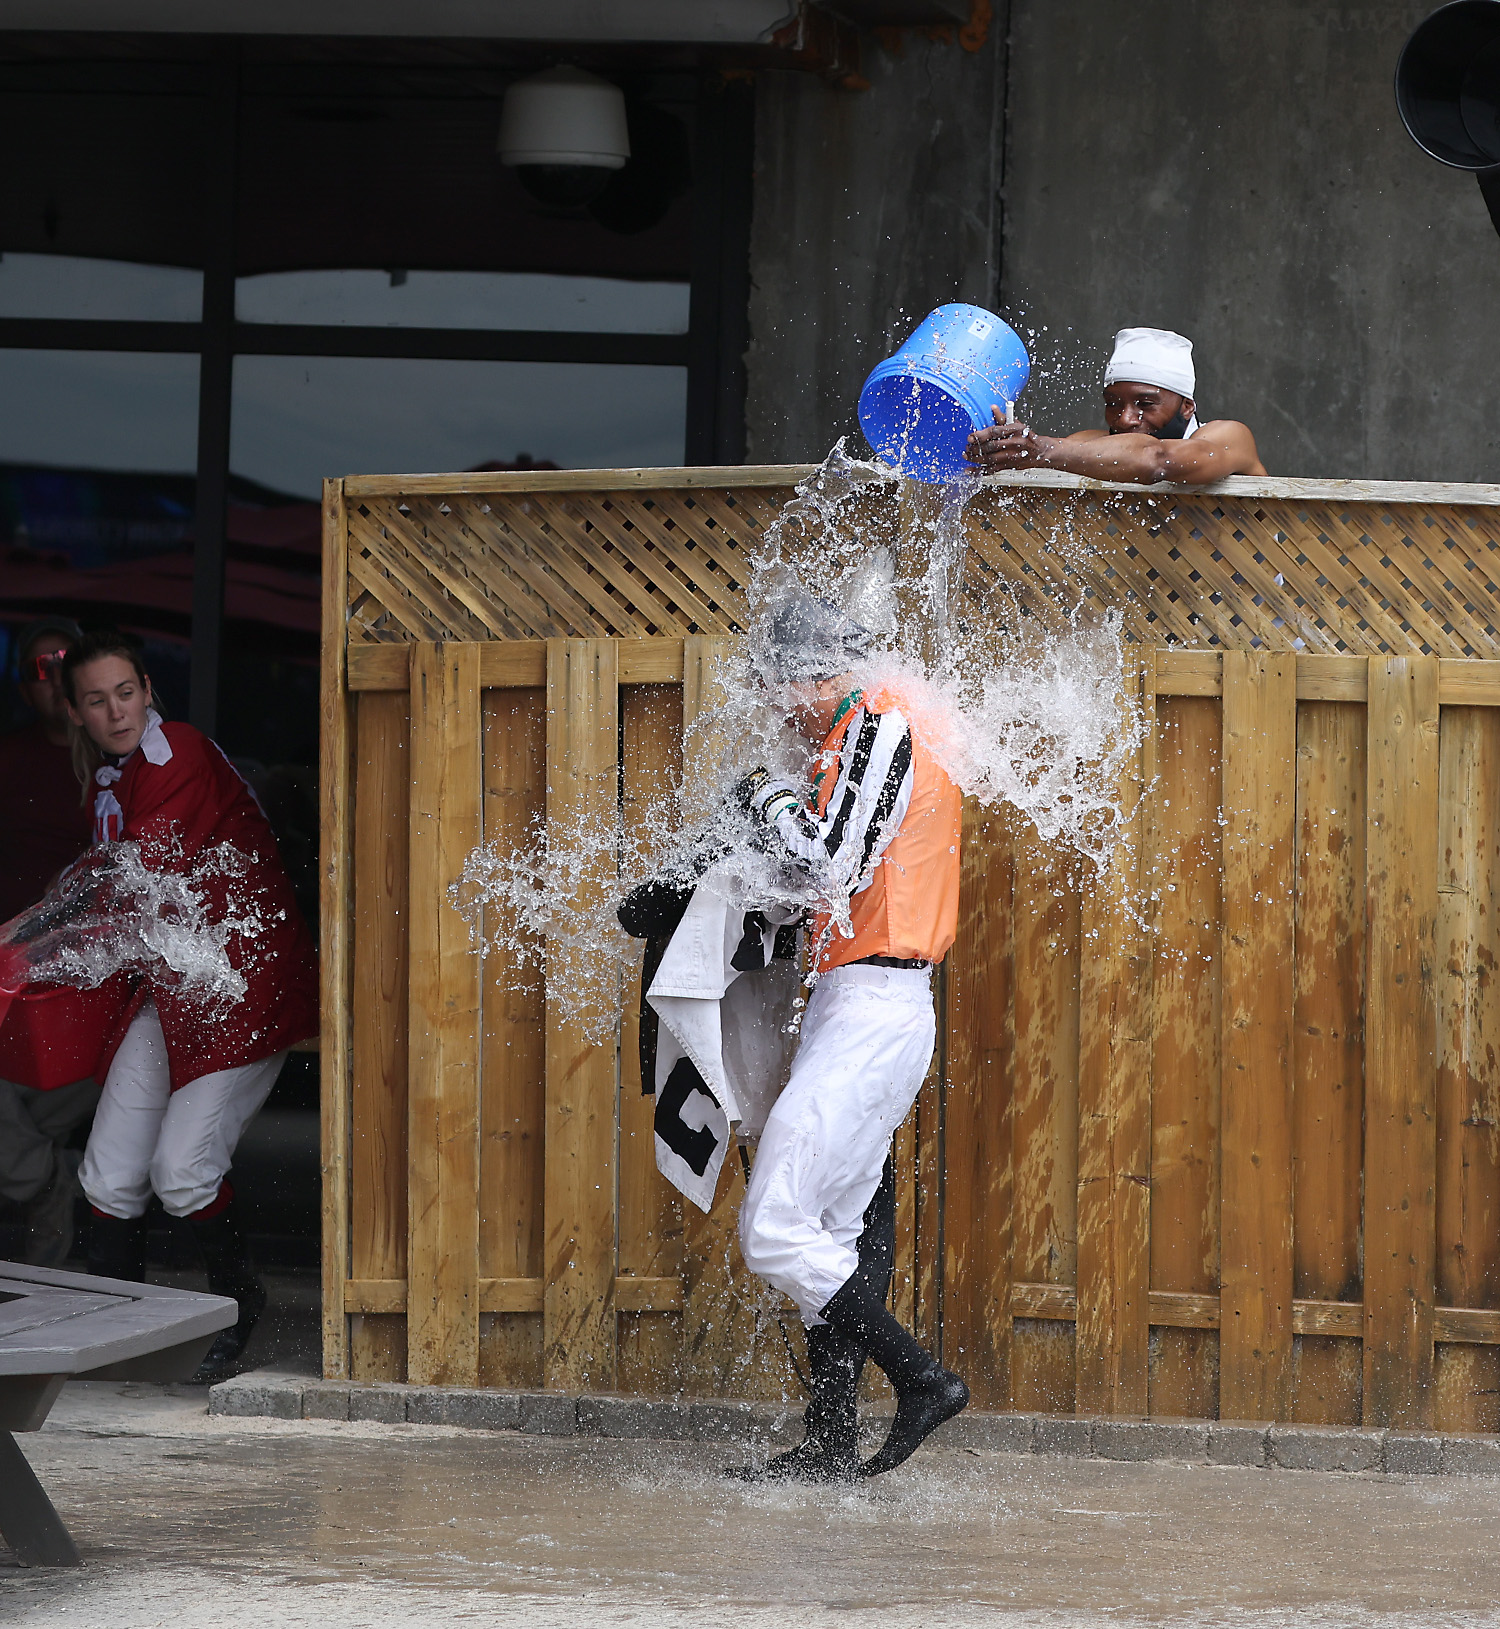 As is customary when a rider wins his first race, Alexis Sanchez is doused with water by his fellow riders. (New Image Media).